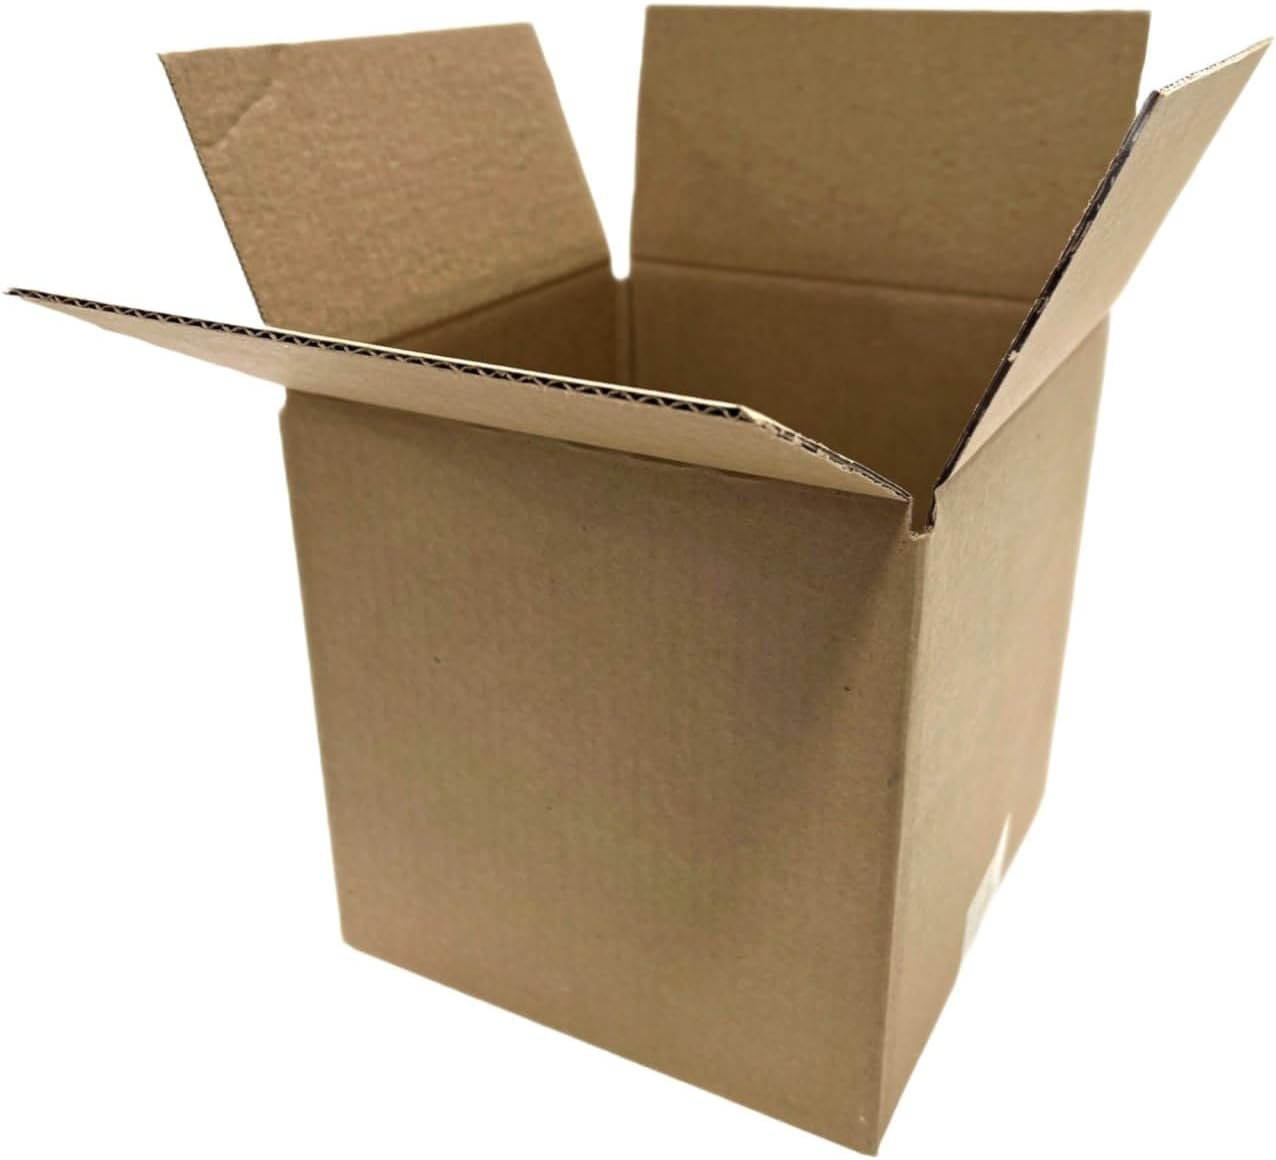 25 8x8x8 Cardboard Paper Boxes Mailing Packing Shipping Box Corrugated